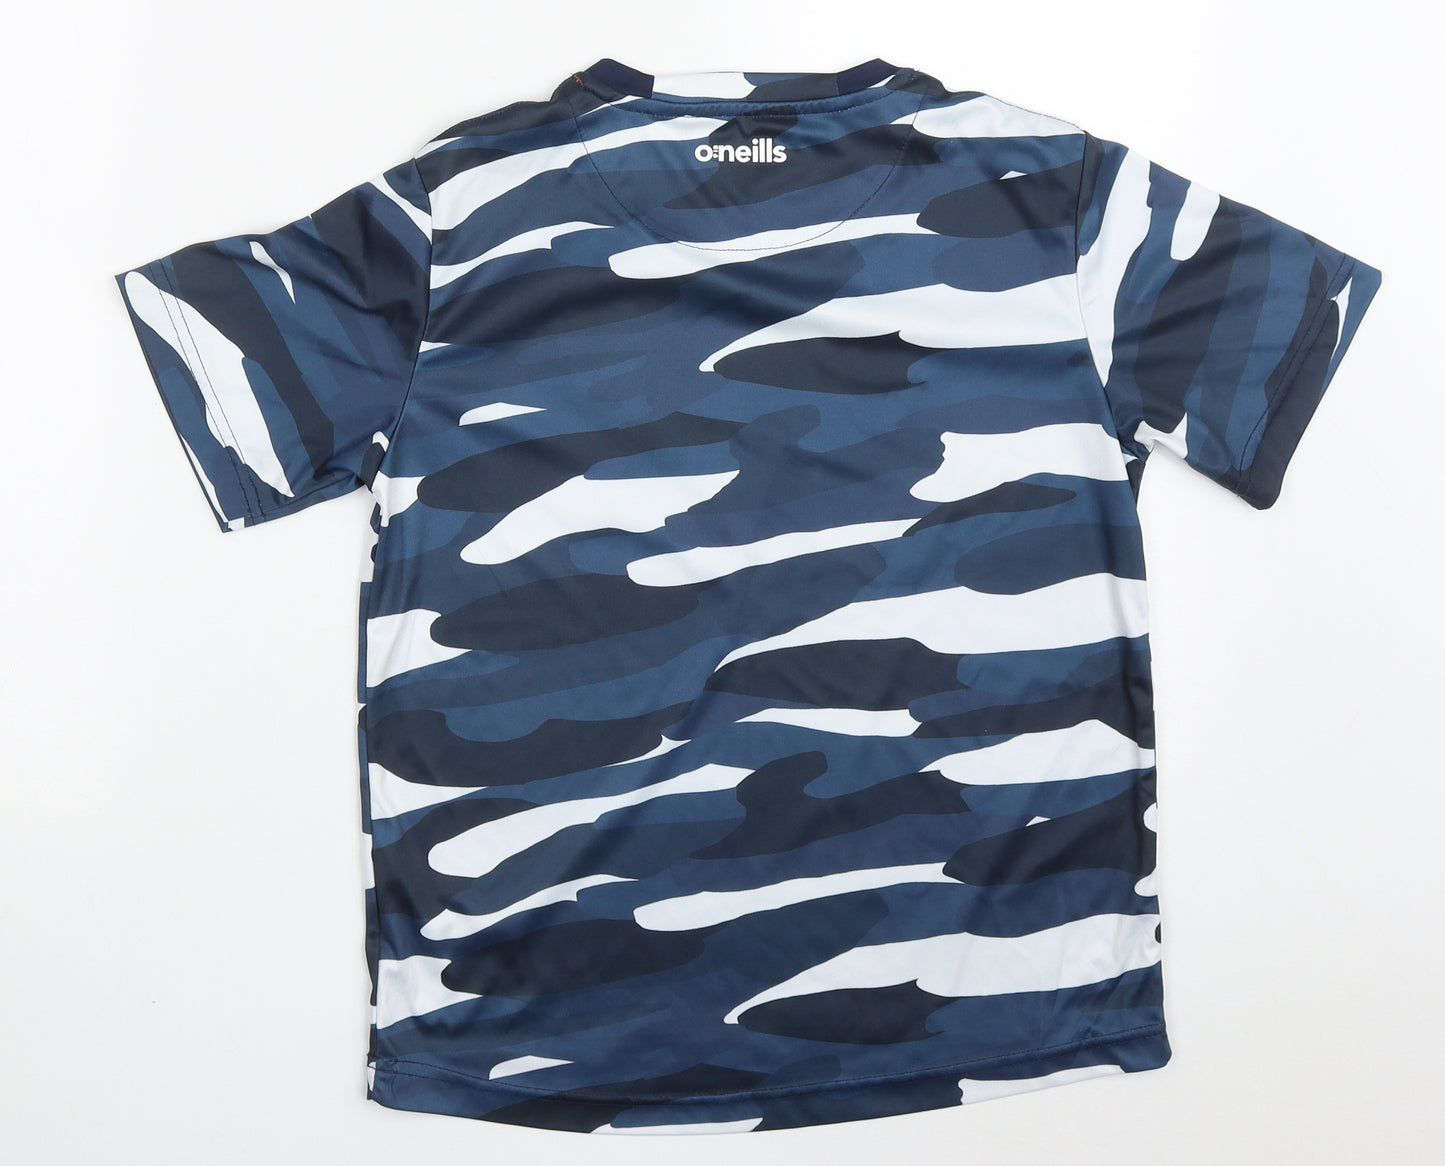 O'Neill Boys Blue Camouflage Polyester Basic T-Shirt Size 10-11 Years Crew Neck Pullover - Simply Fruit Ard Mhacha